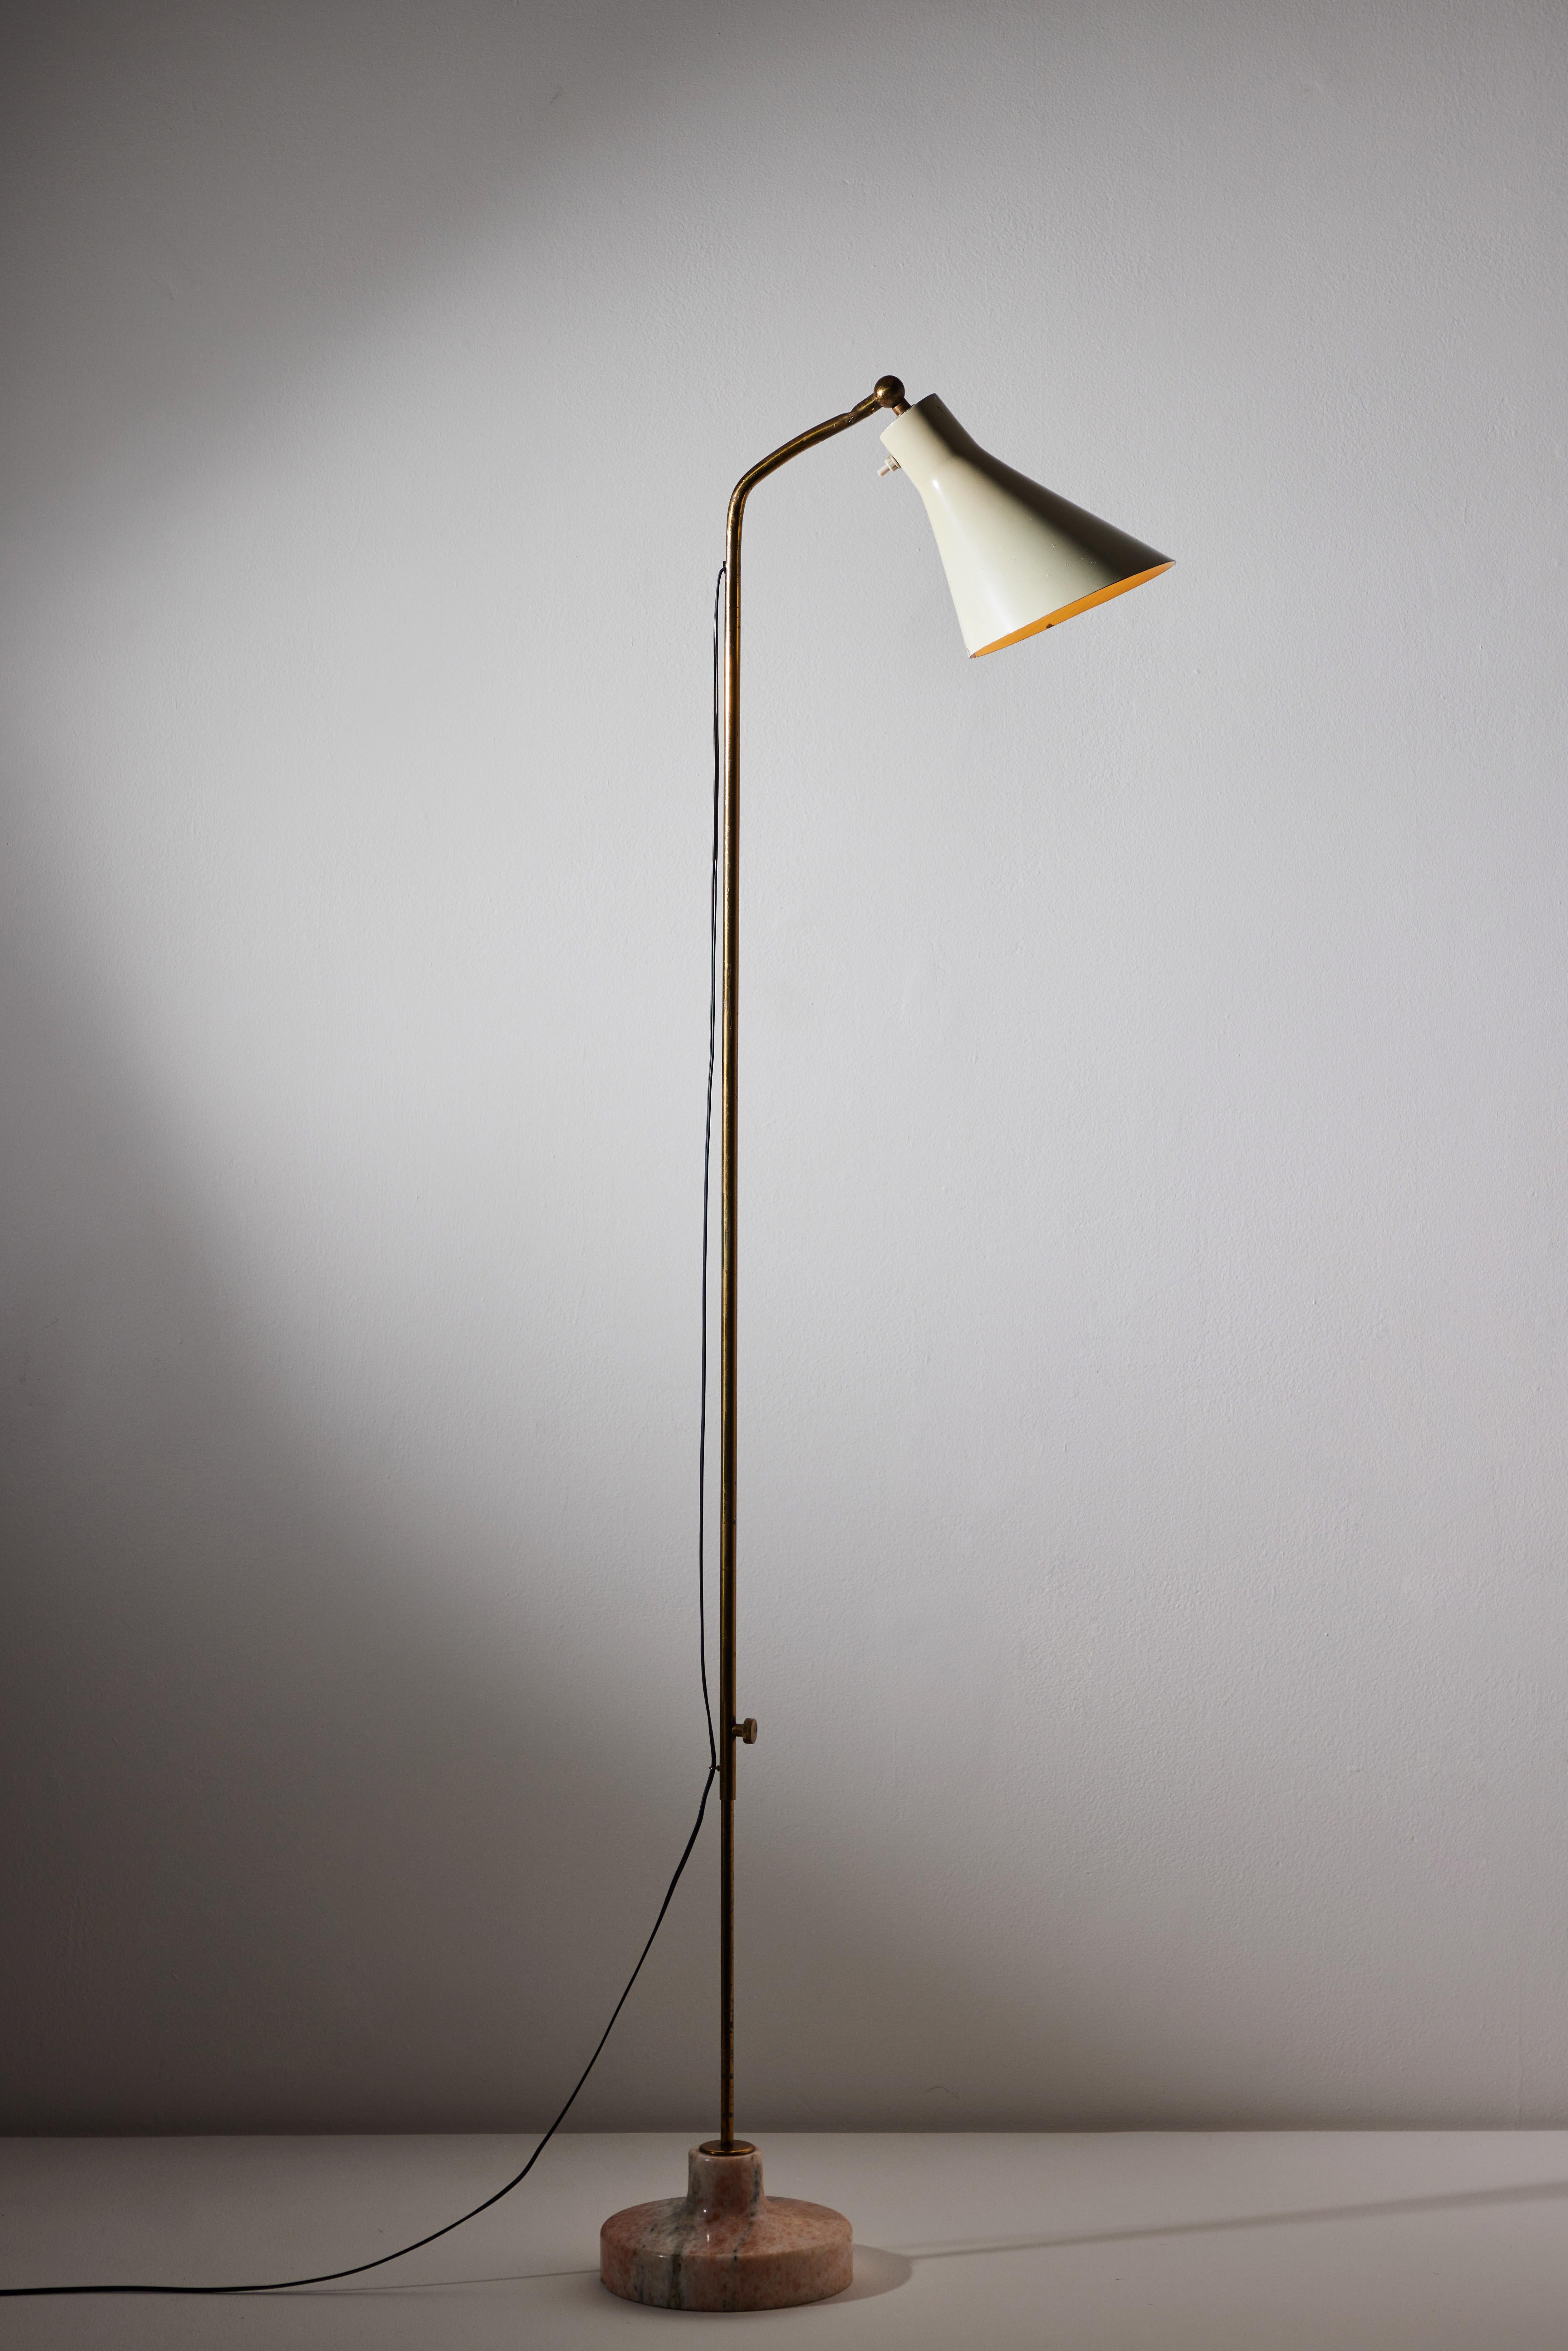 Model Lte3 Alzabile Floor Lamp by Ignazio Gardella for Azucena. Designed and manufactured in Italy, circa 1950's. Enameled metal, brass, marble base. Adjustable shade. Original European cord. Height adjust from 72 inches to 48 inches. Diameter